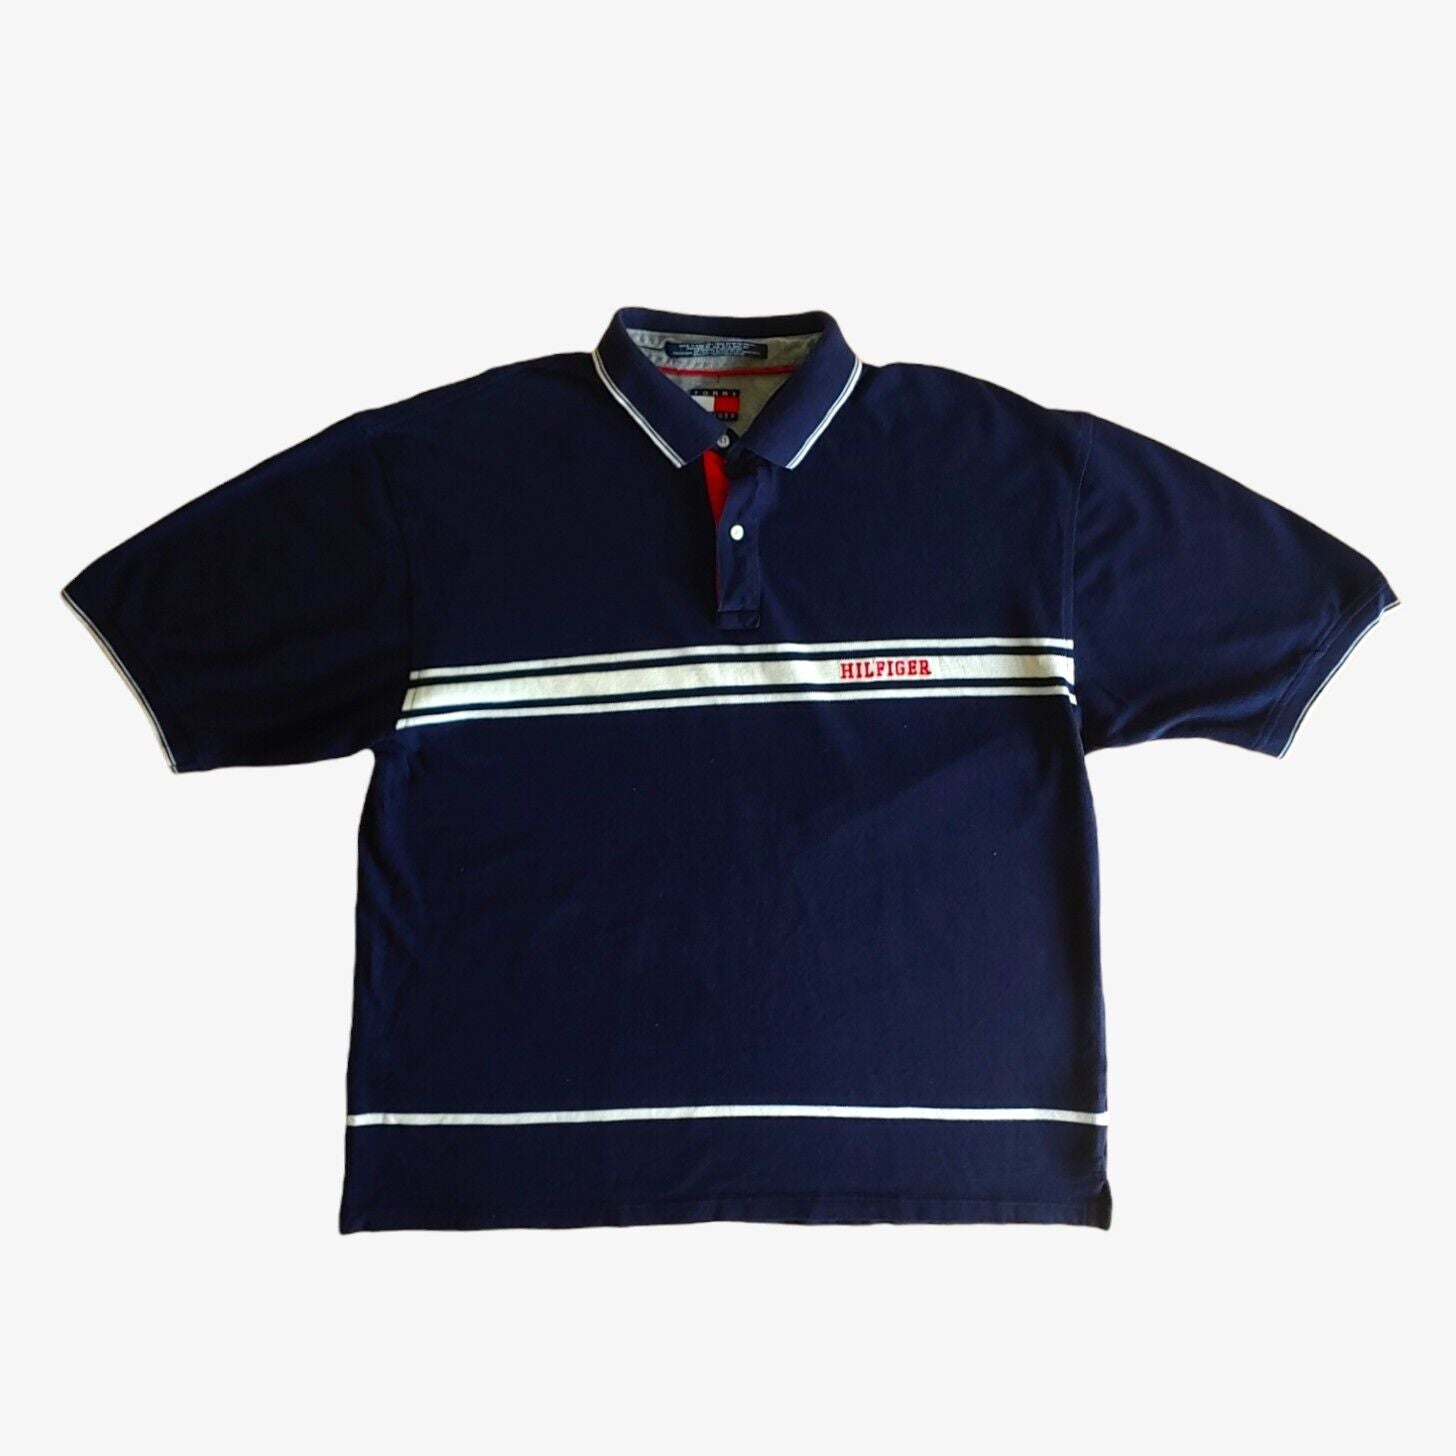 Vintage 90s Tommy Hilfiger Striped Navy Polo Shirt With Breast Logo - Casspios Dream